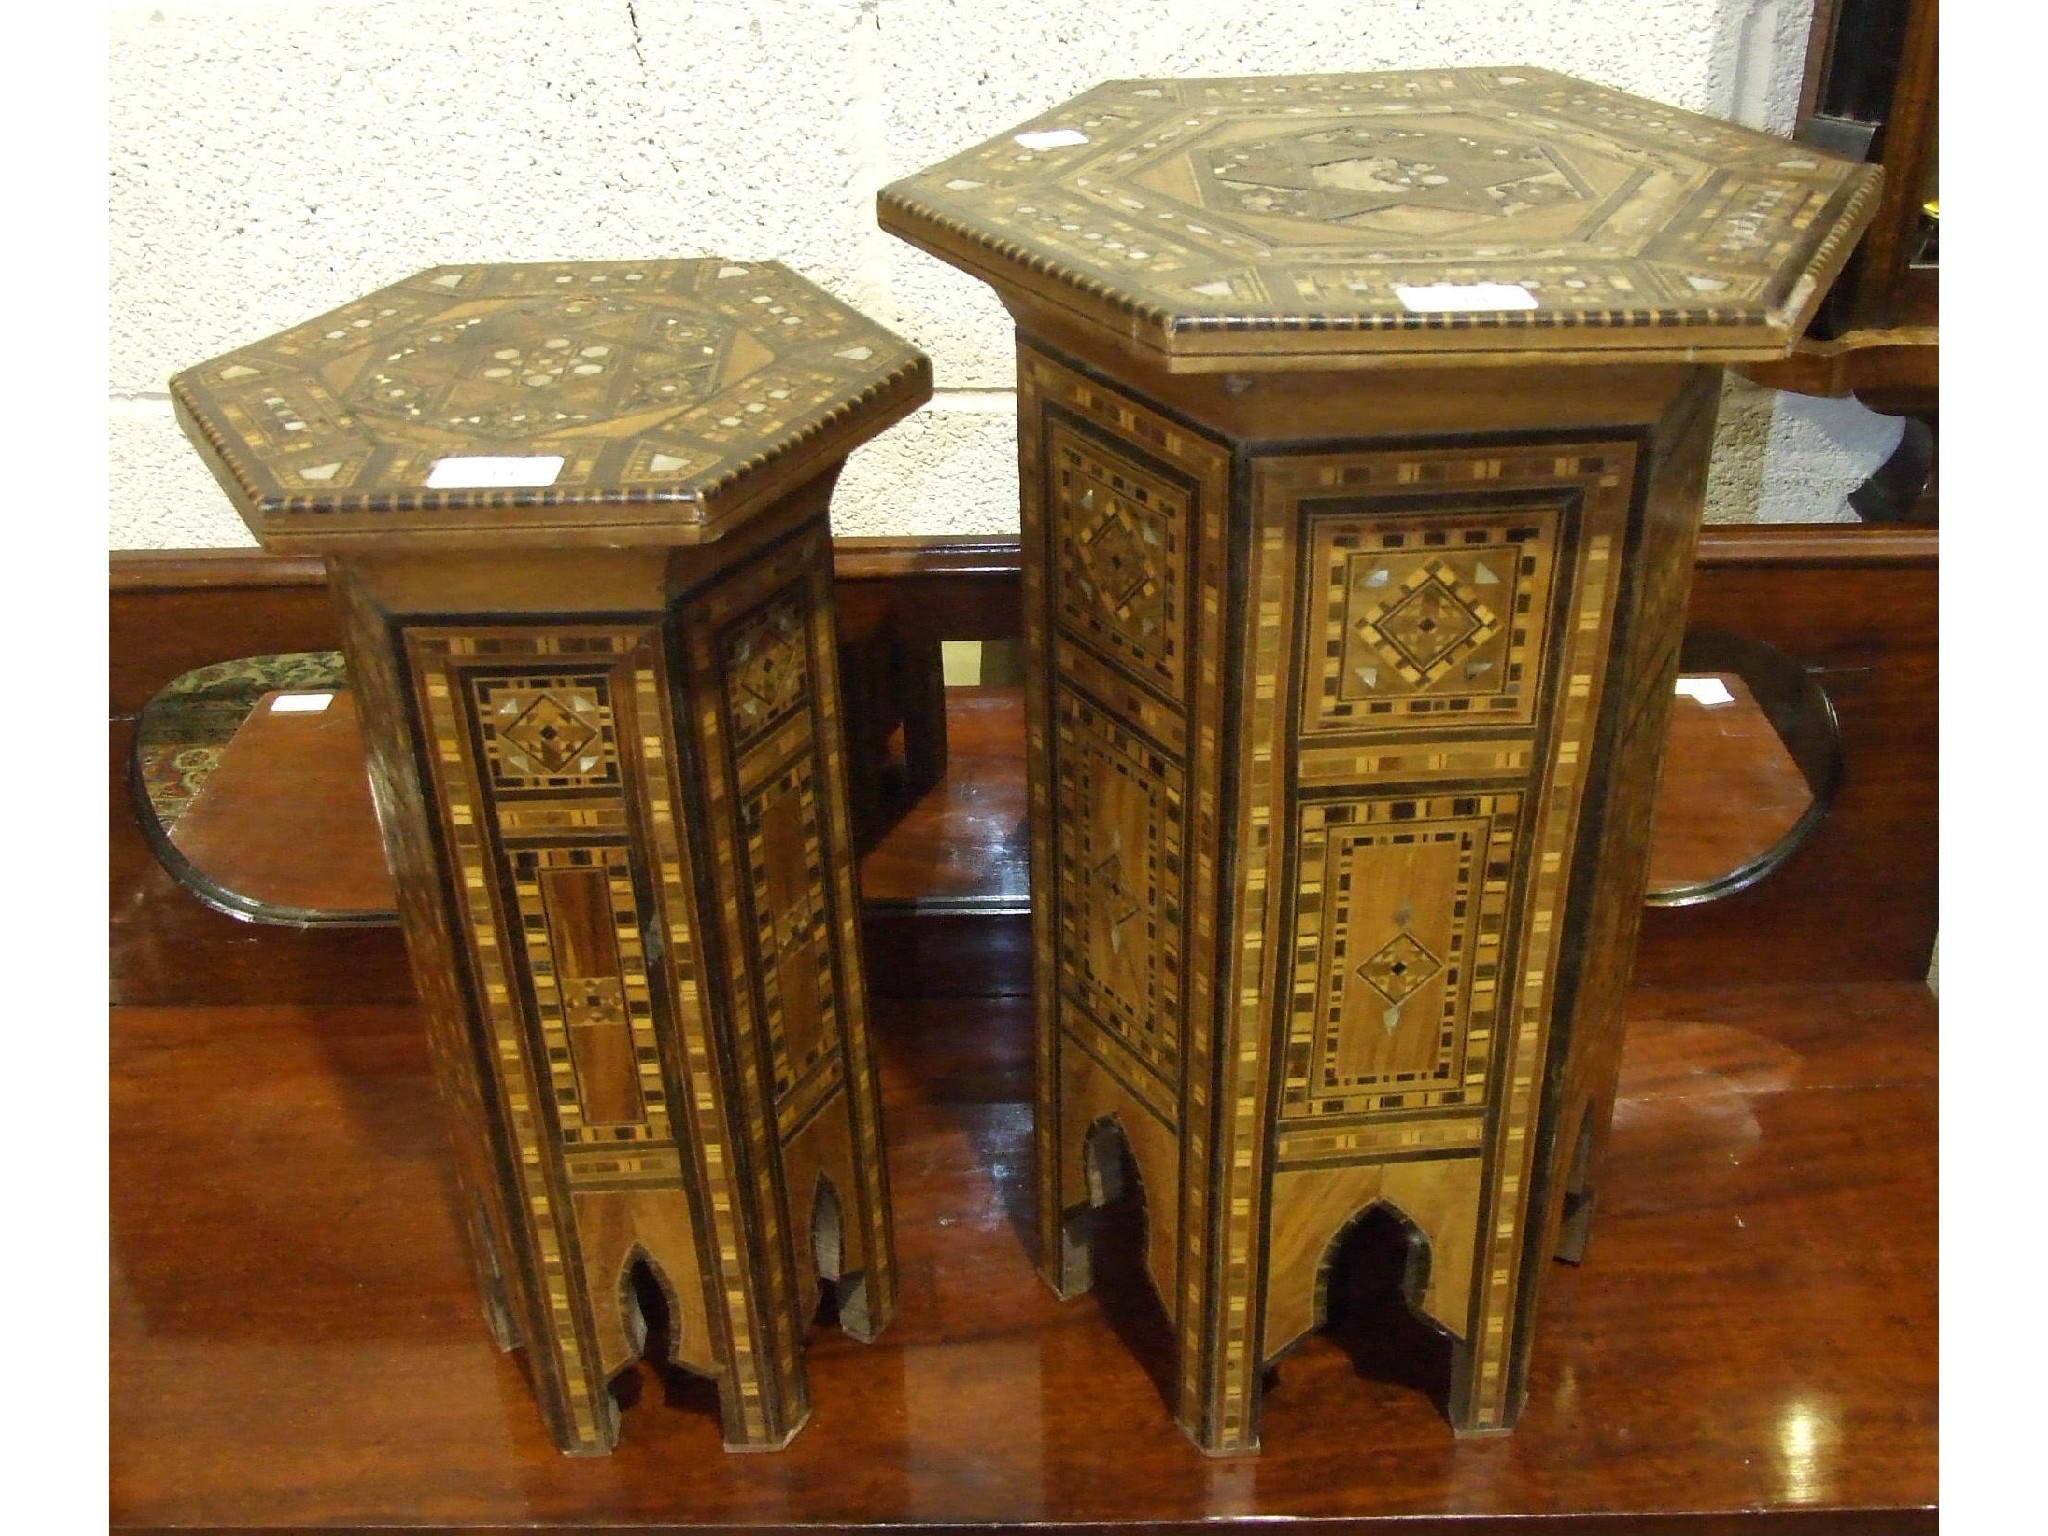 An Eastern hexagonal plant stand with marquetry and mother of pearl inlay overall, 35cm wide, 52cm